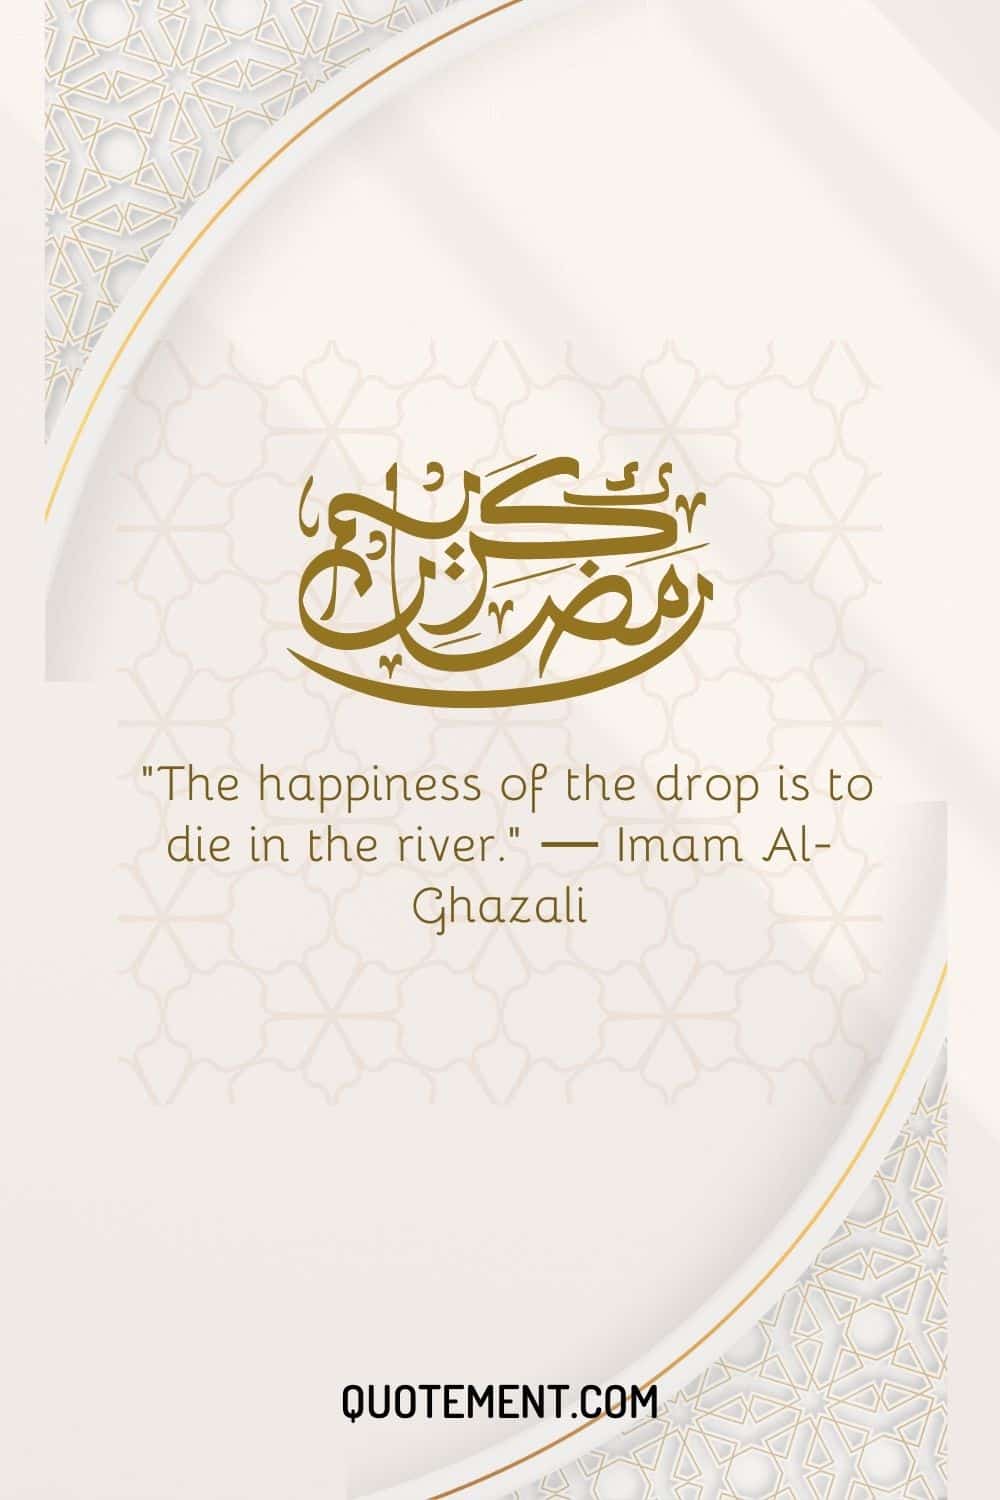 The happiness of the drop is to die in the river